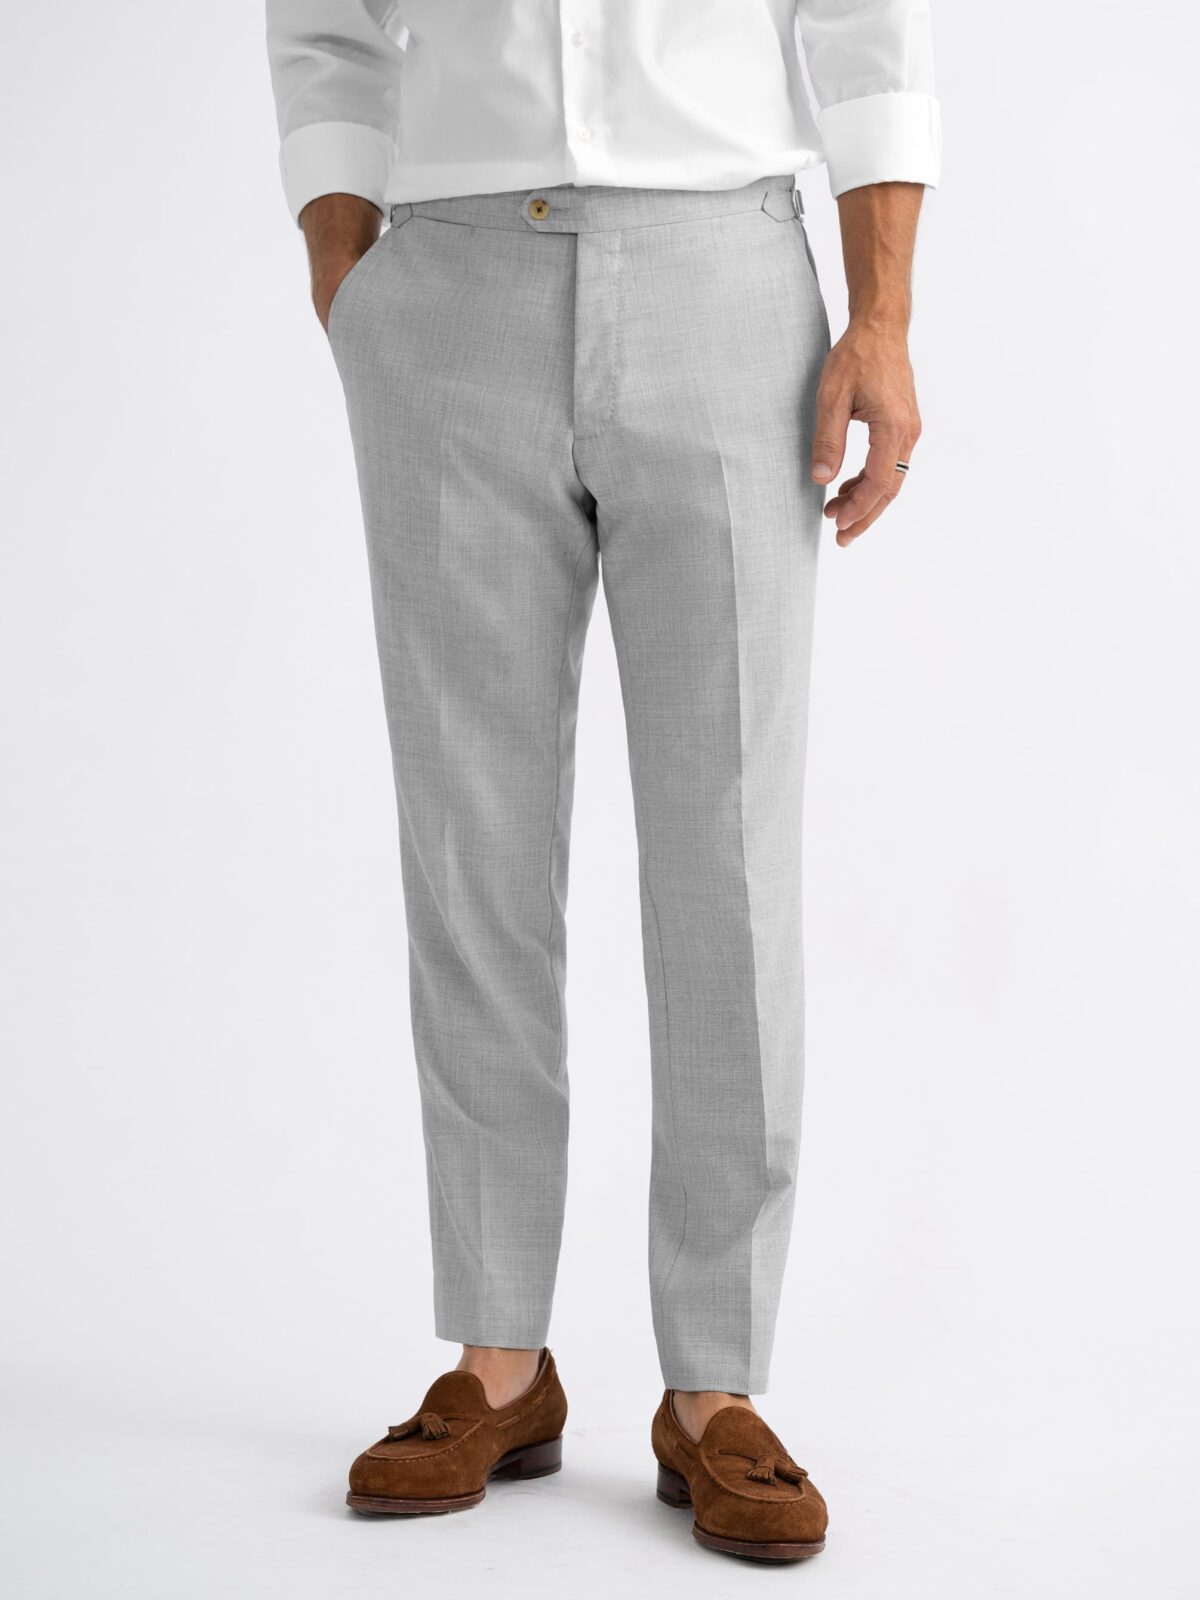 Tropical Wool Trousers - The Ben Silver Collection